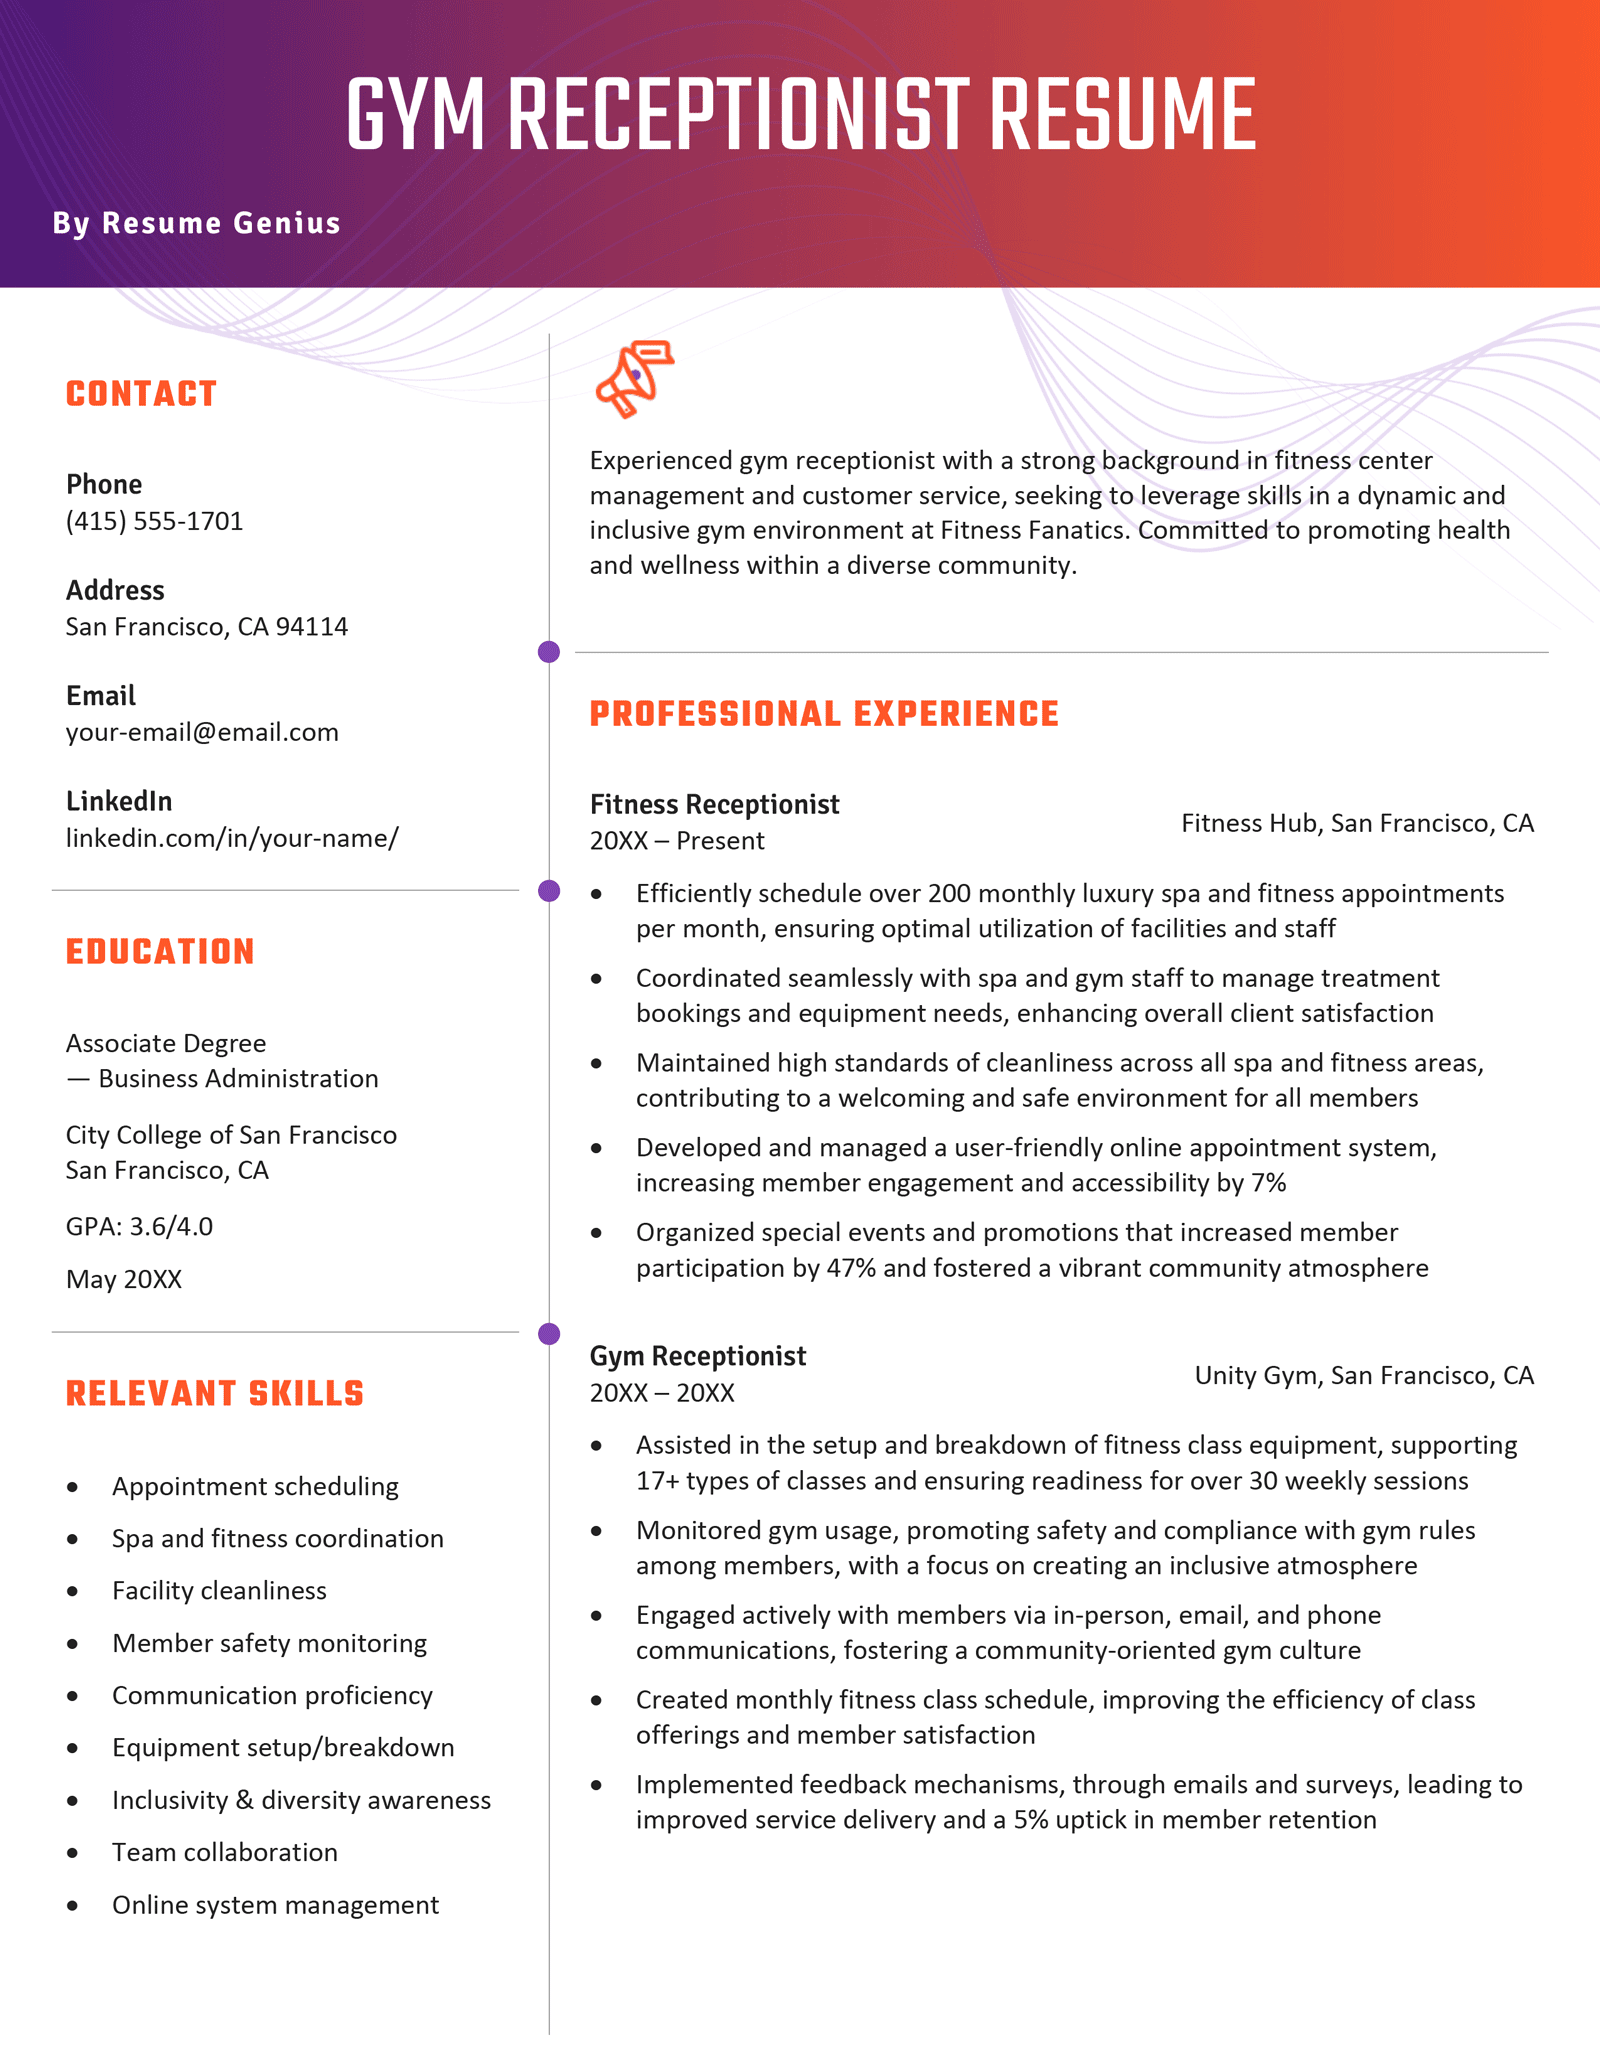 A gym (or spa) receptionist resume example that uses bold colors and a sidebar to make its key information stand out to users.